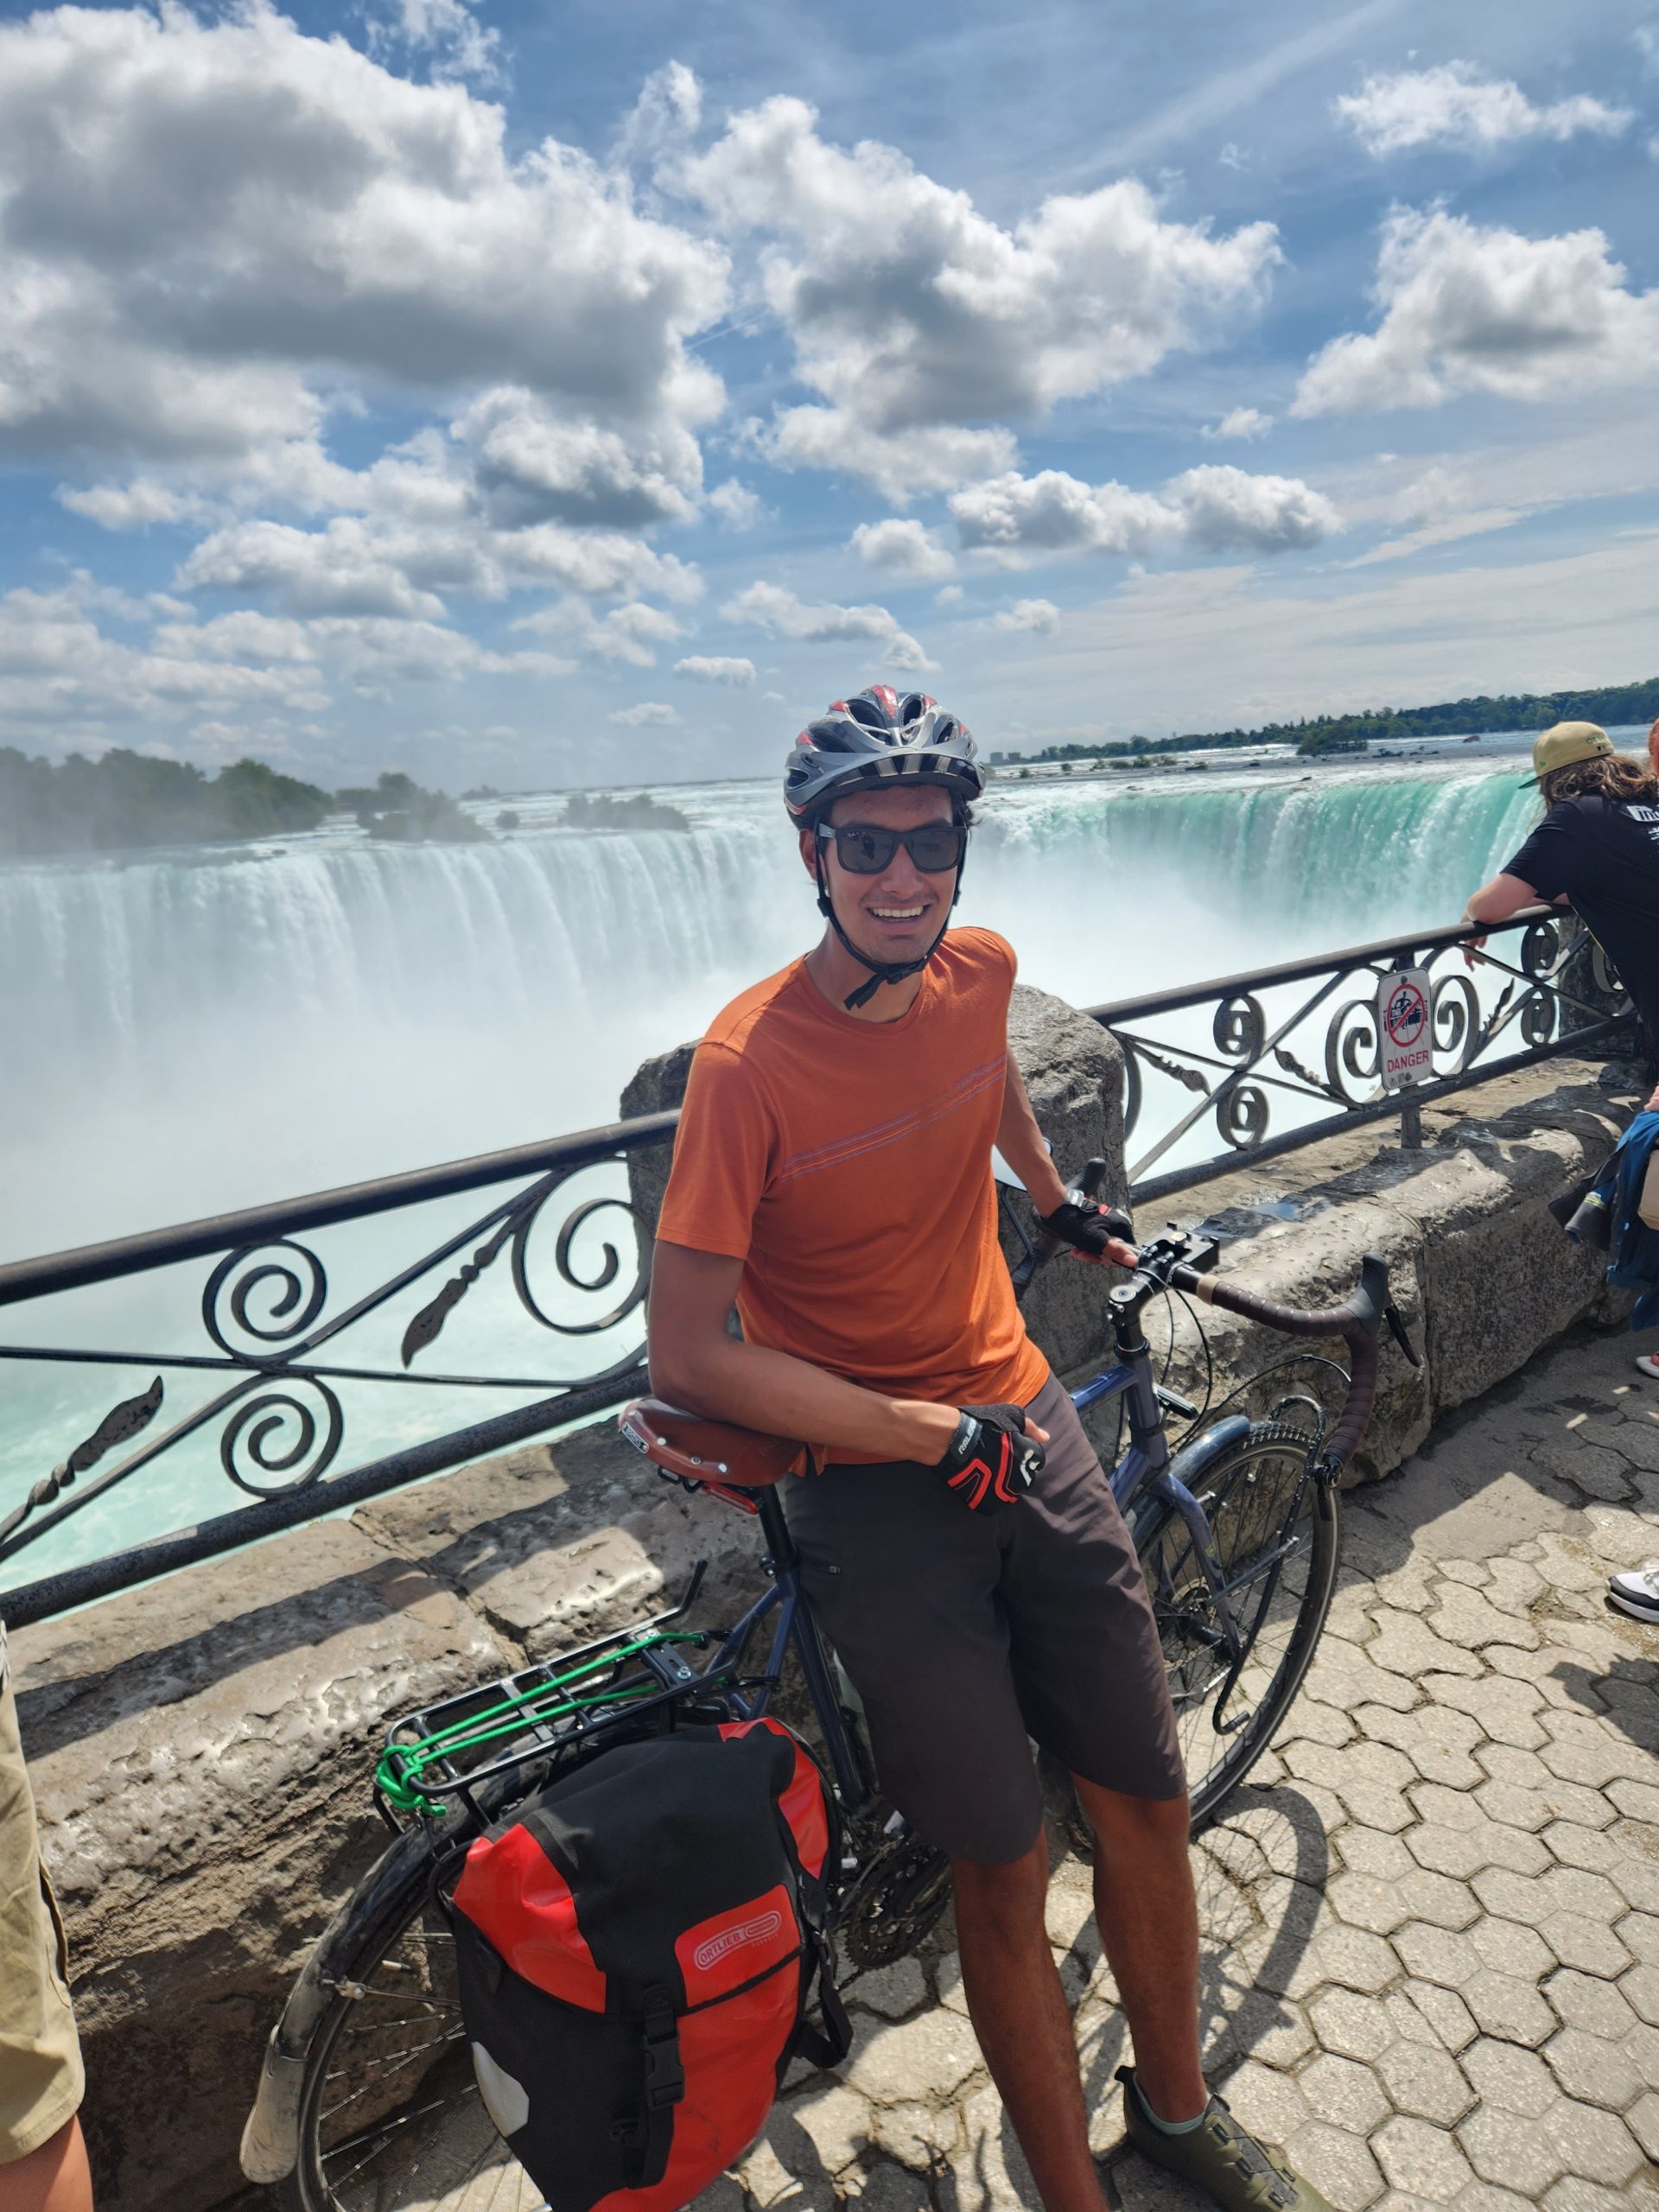 Dylan Curtis has raised nearly $4,000 so far in support of mental health during his journey across Canada.